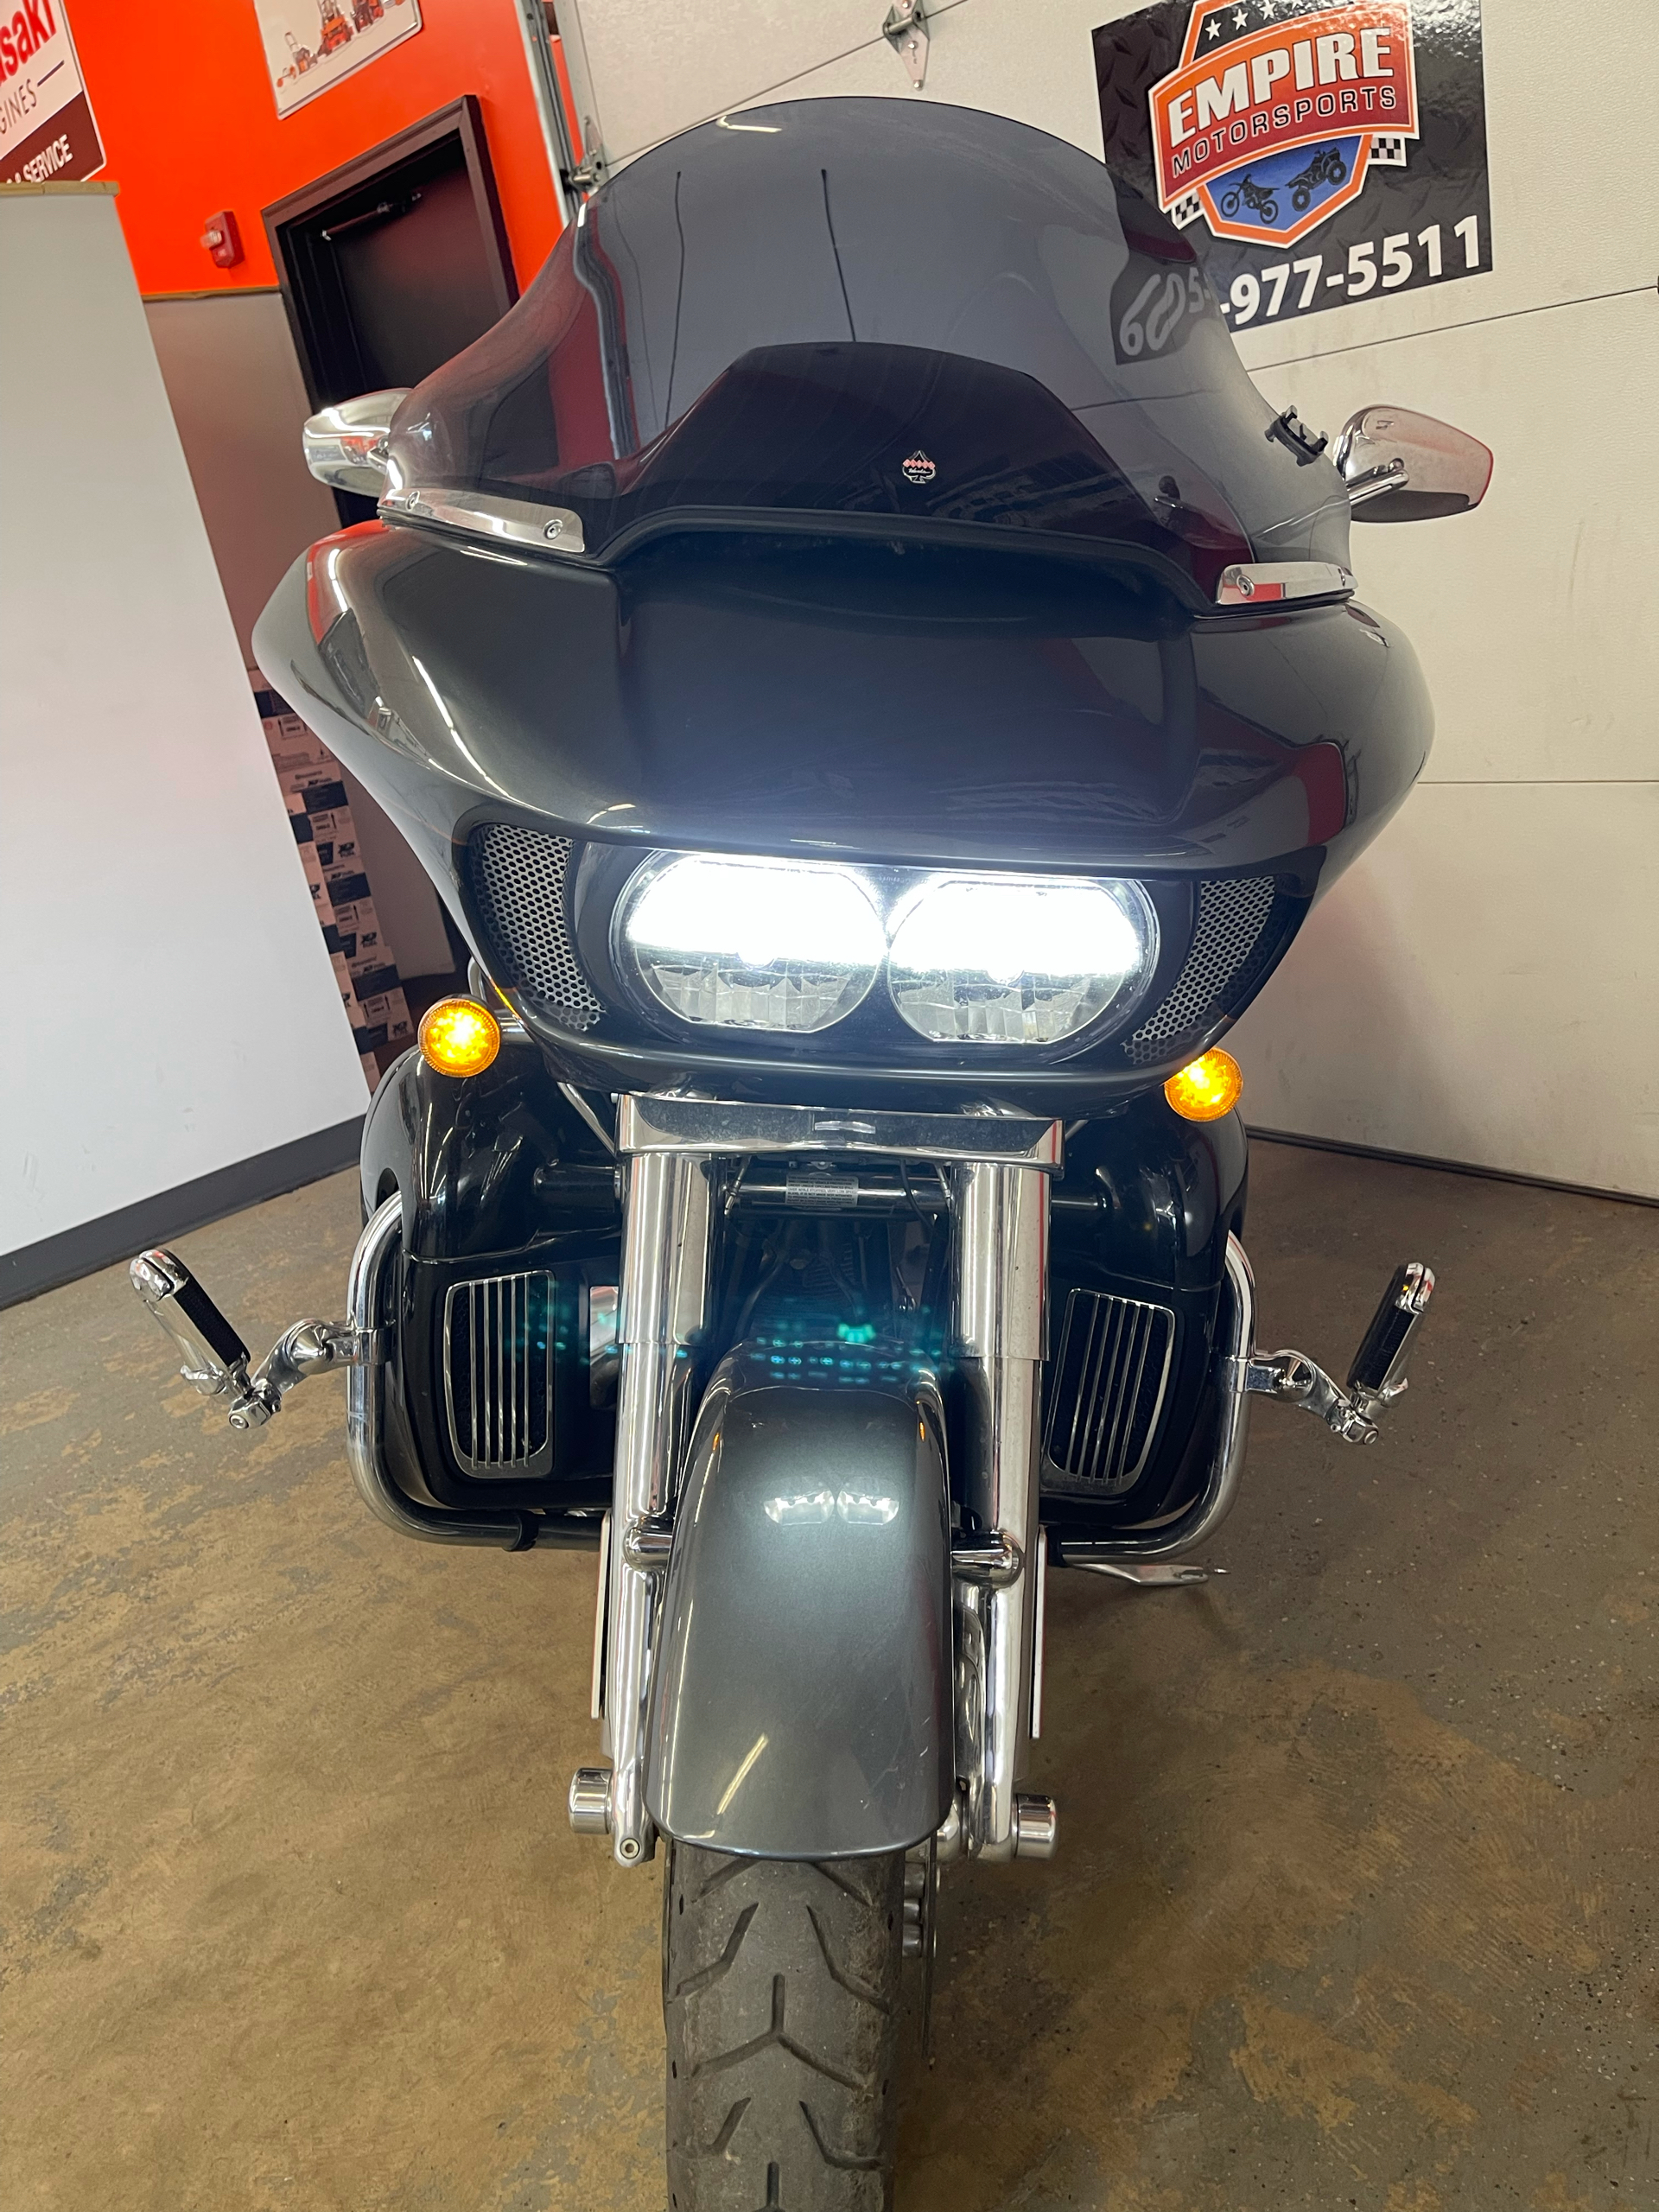 Used 2016 Harley Davidson Cvo Road Glide Ultra Motorcycles In Sioux Falls Sd Har955355 Charcoal Slate Carbon Dust